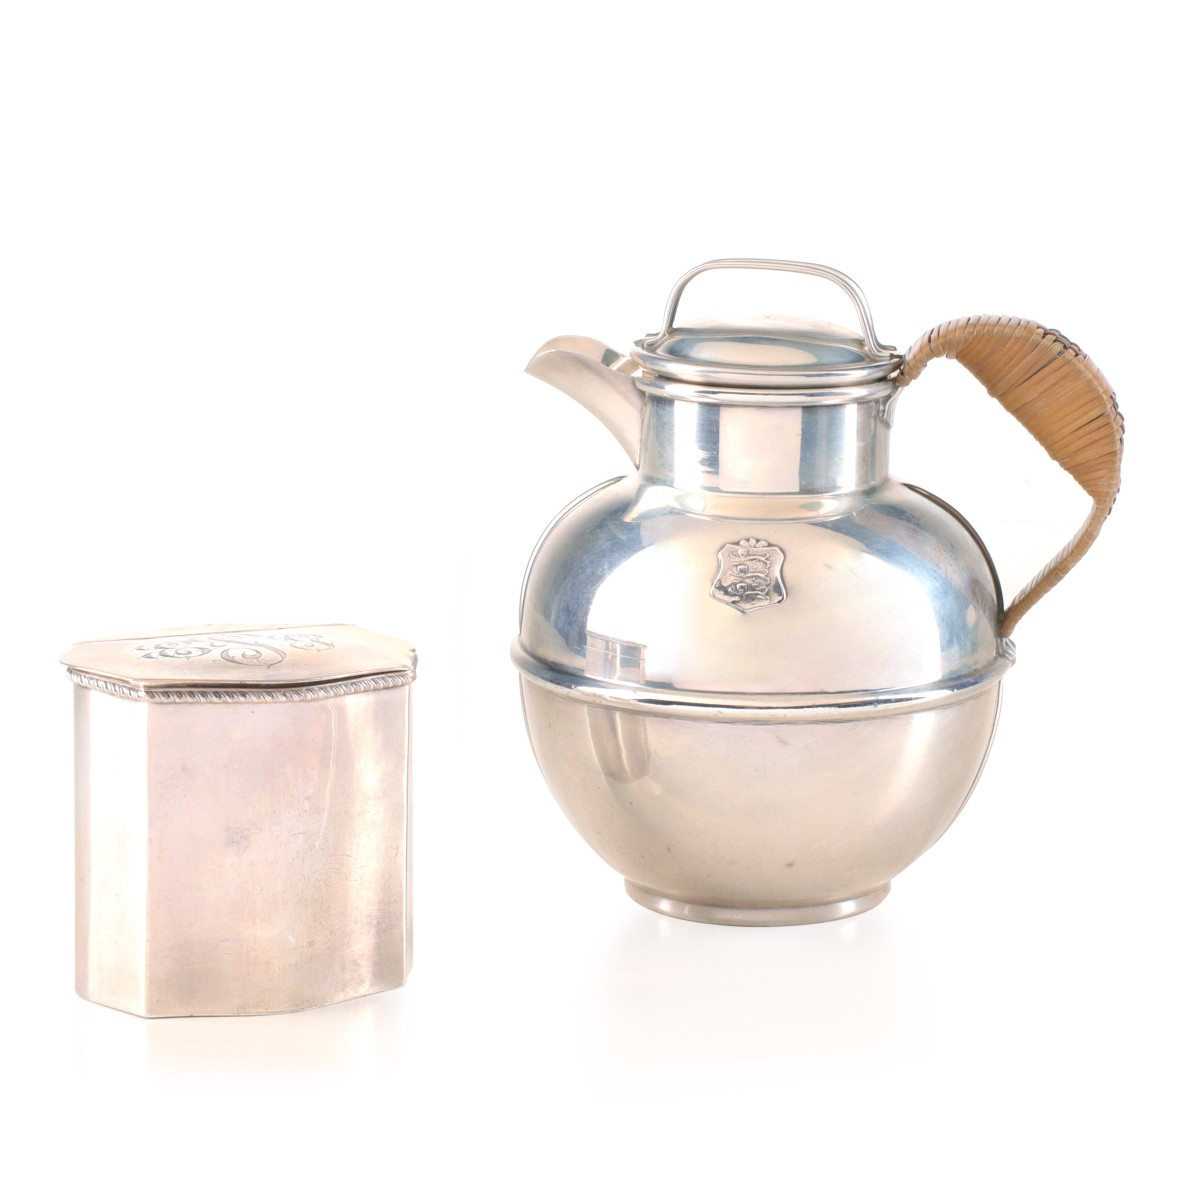 20TH CENTURY STERLING SILVER TEA CADDY AND POT